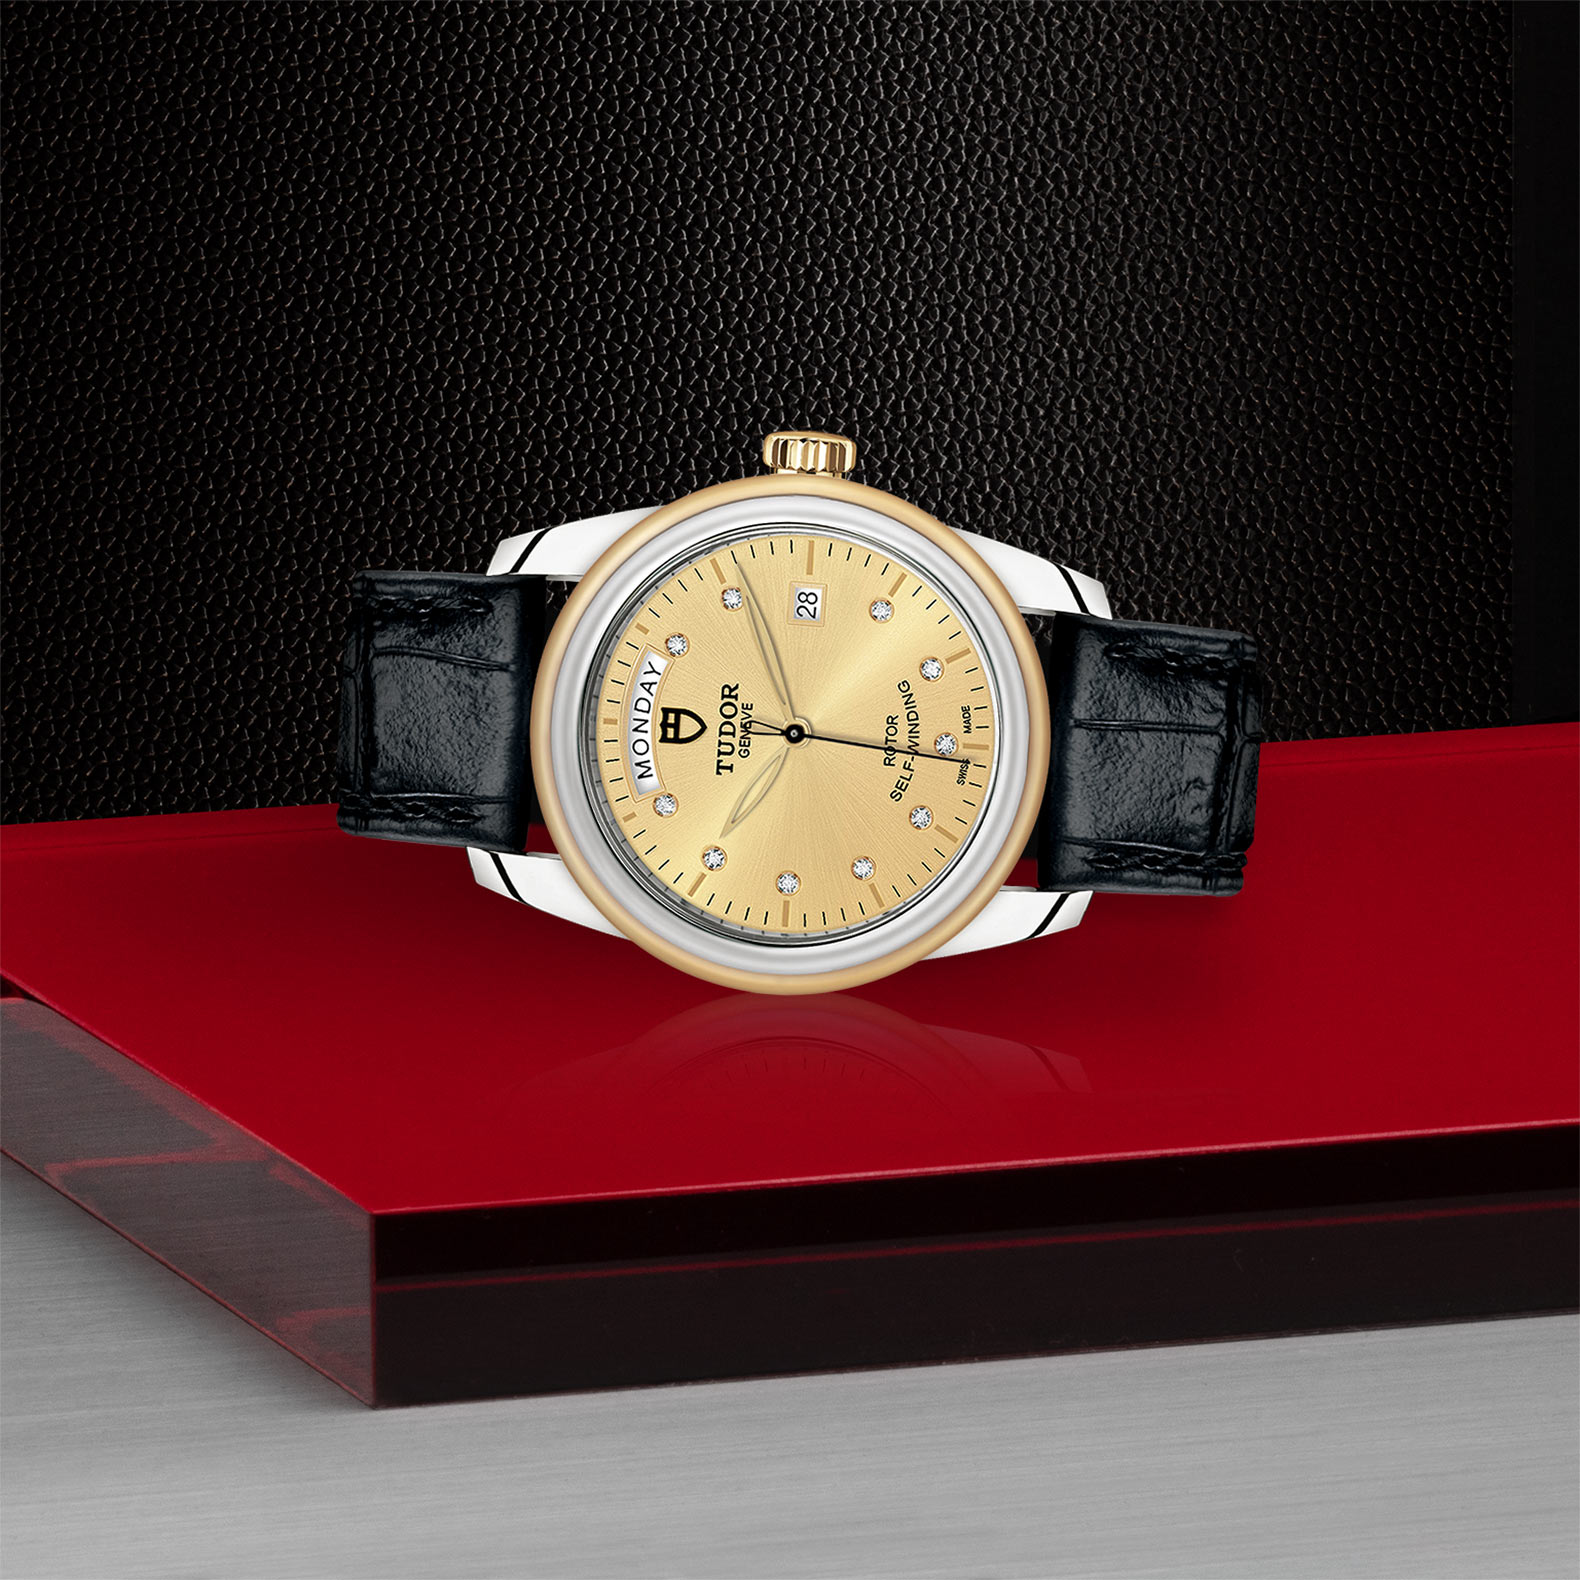 TUDOR Glamour Date+Day - M56003-0035